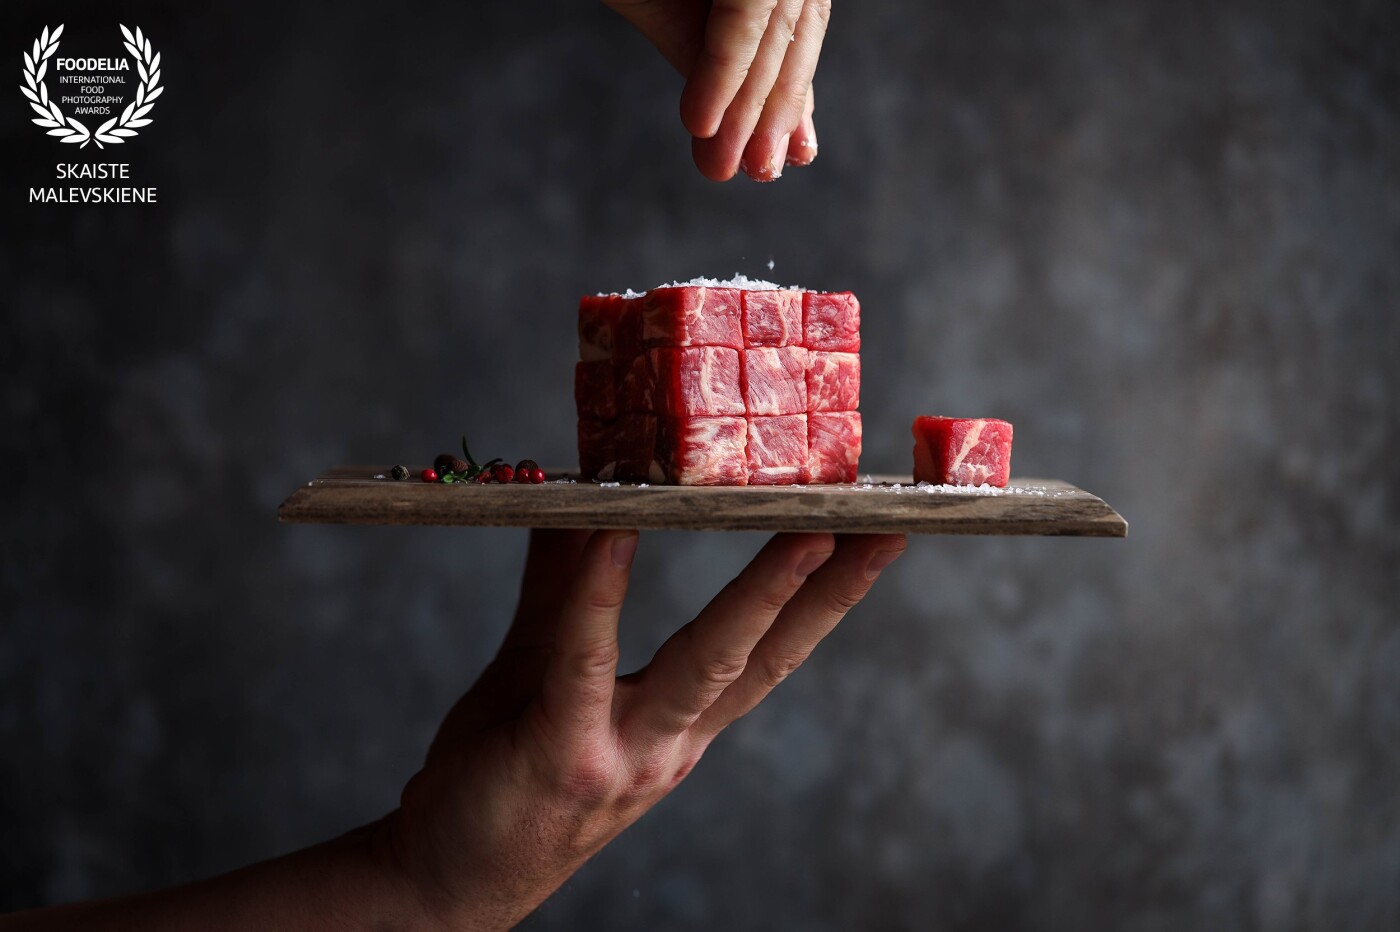 Marble beef cube(s). Sometimes I like to deconstruct the products and take them out of ordinary context. The small marble beef cubes reminded me of Rubik’s cube, so I’ve made one.